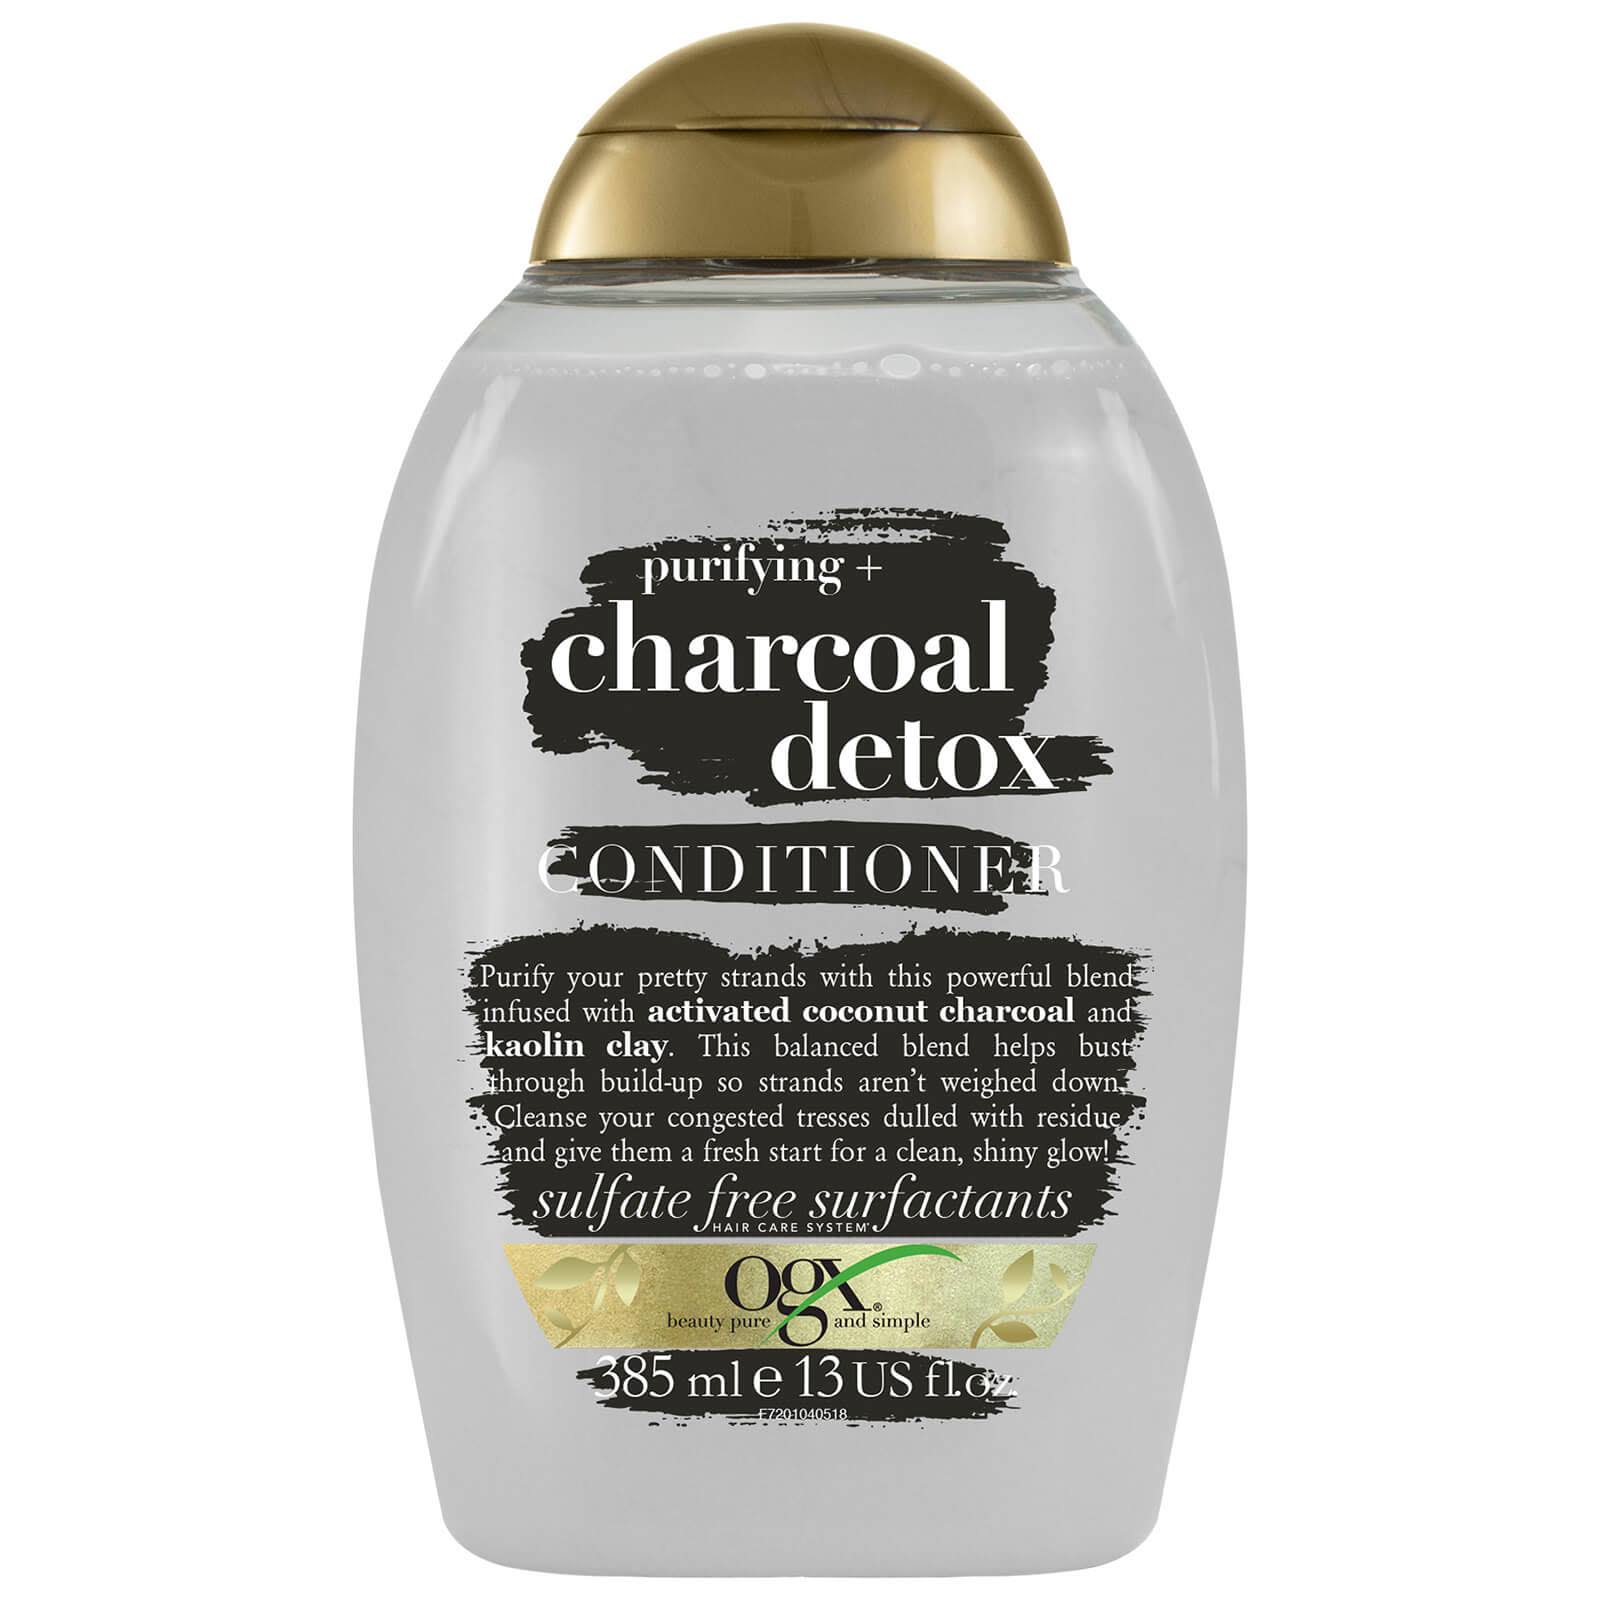 OGX Purifying & Charcoal Detox Conditioner - 385ml